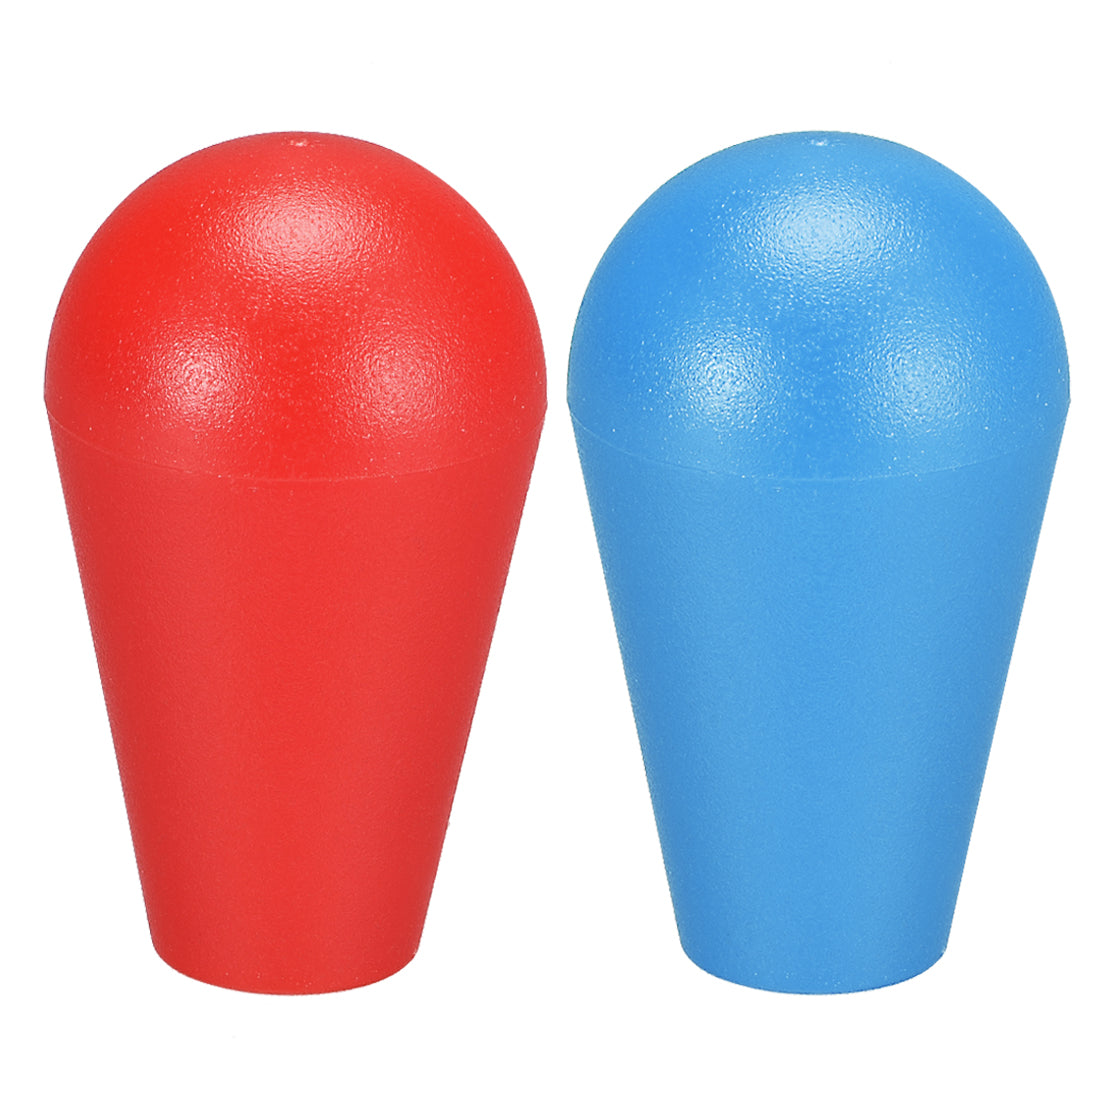 uxcell Uxcell Ellipse Oval Joystick Head Rocker Ball Top Handle American Type Arcade Game DIY Parts Replacement Red Blue 2Pcs